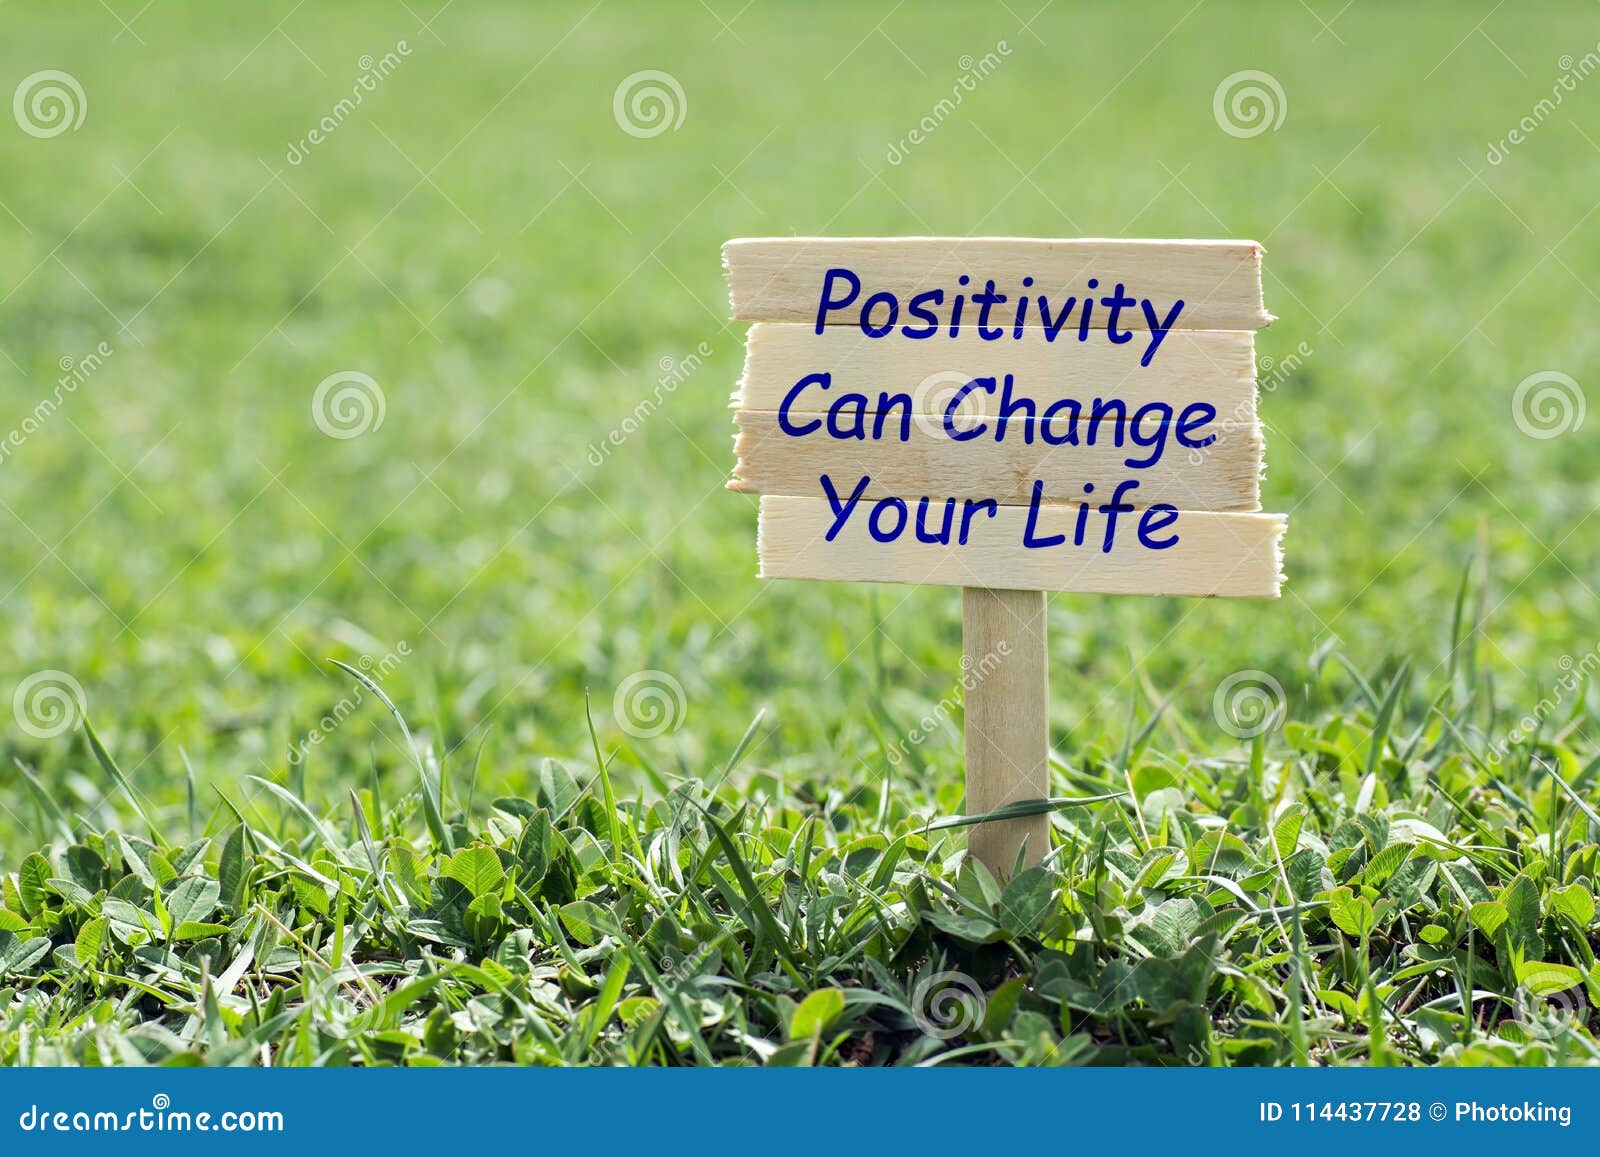 positive can change your life